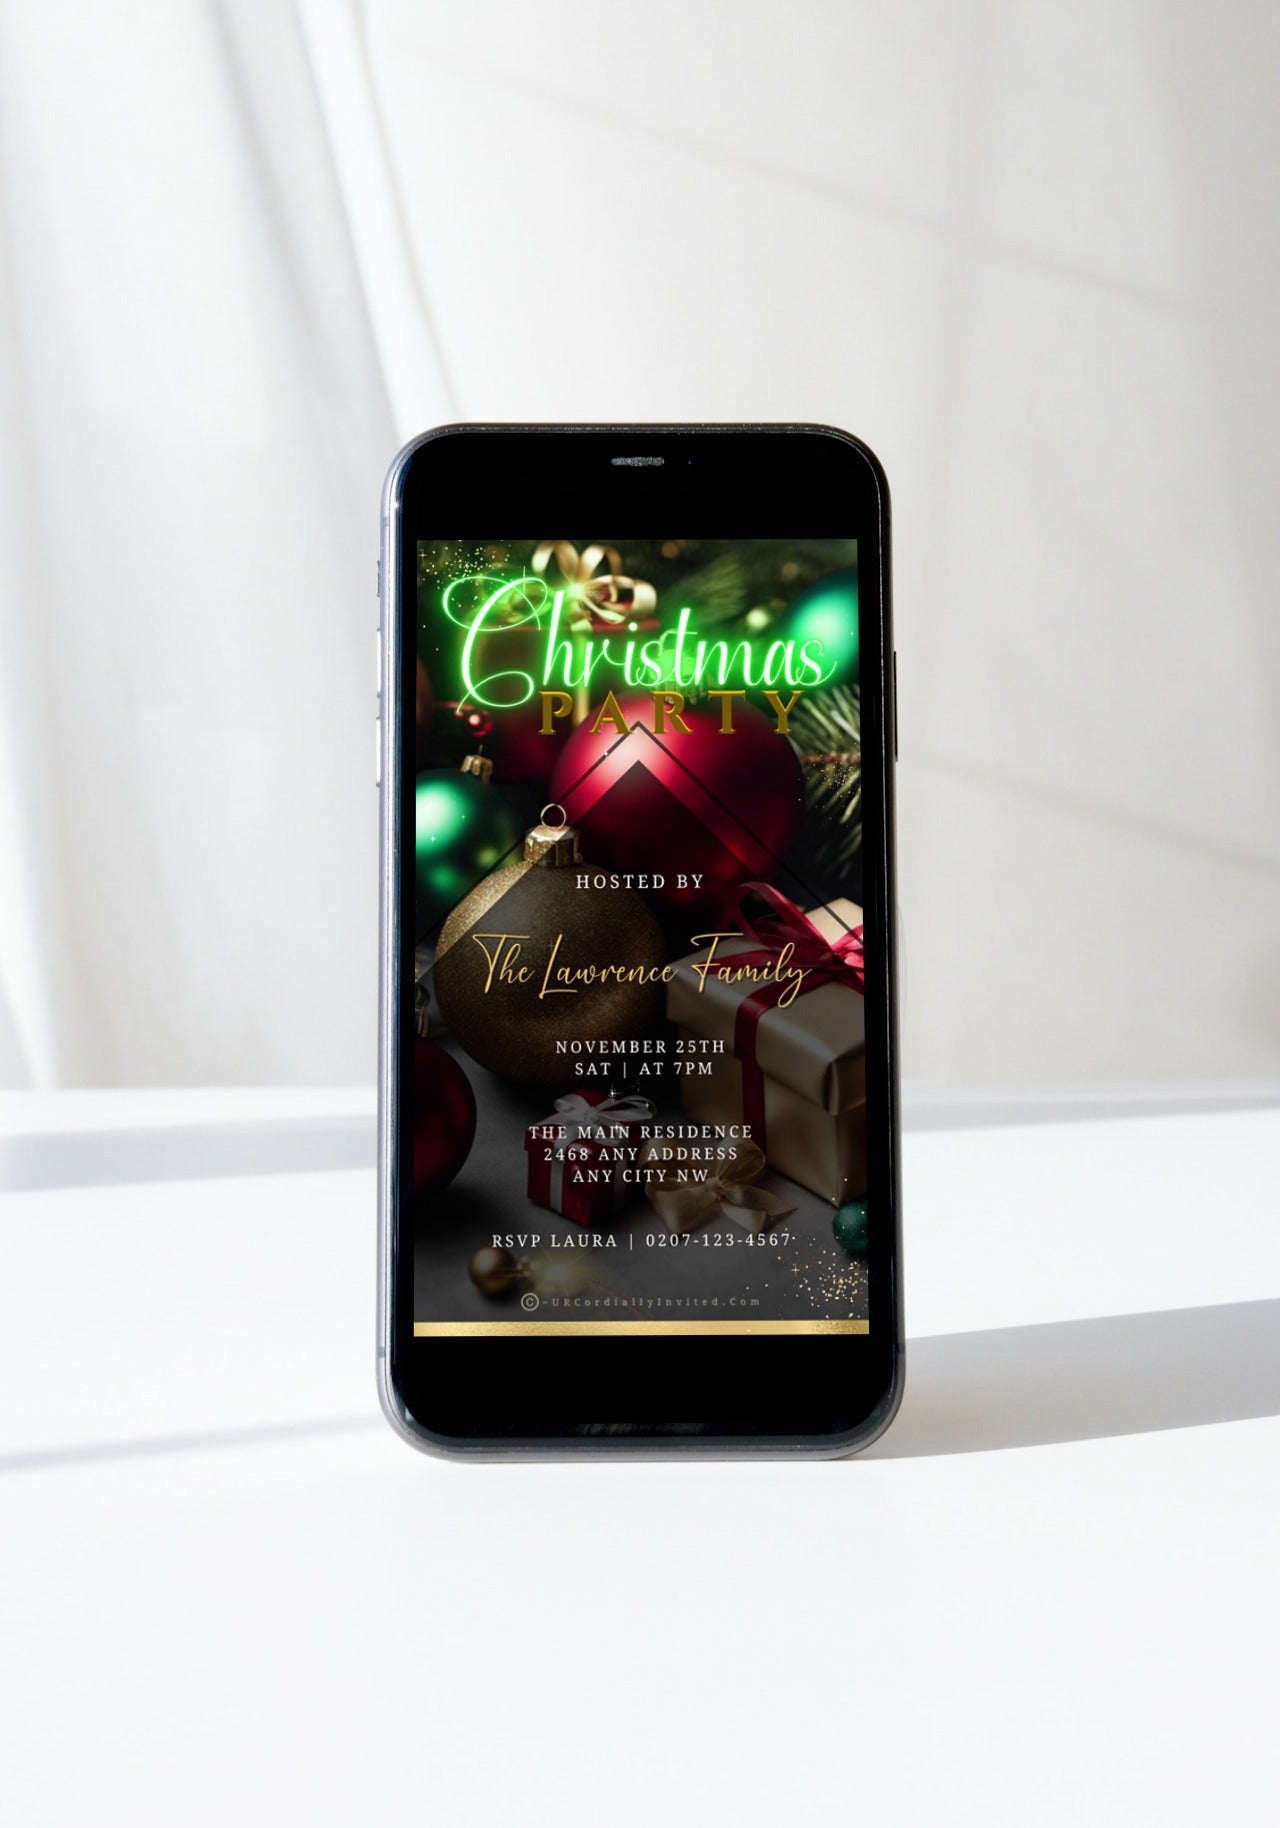 Smartphone displaying a Neon Green Christmas Video Invitation with presents and ornaments, ready to personalize and send via digital platforms.